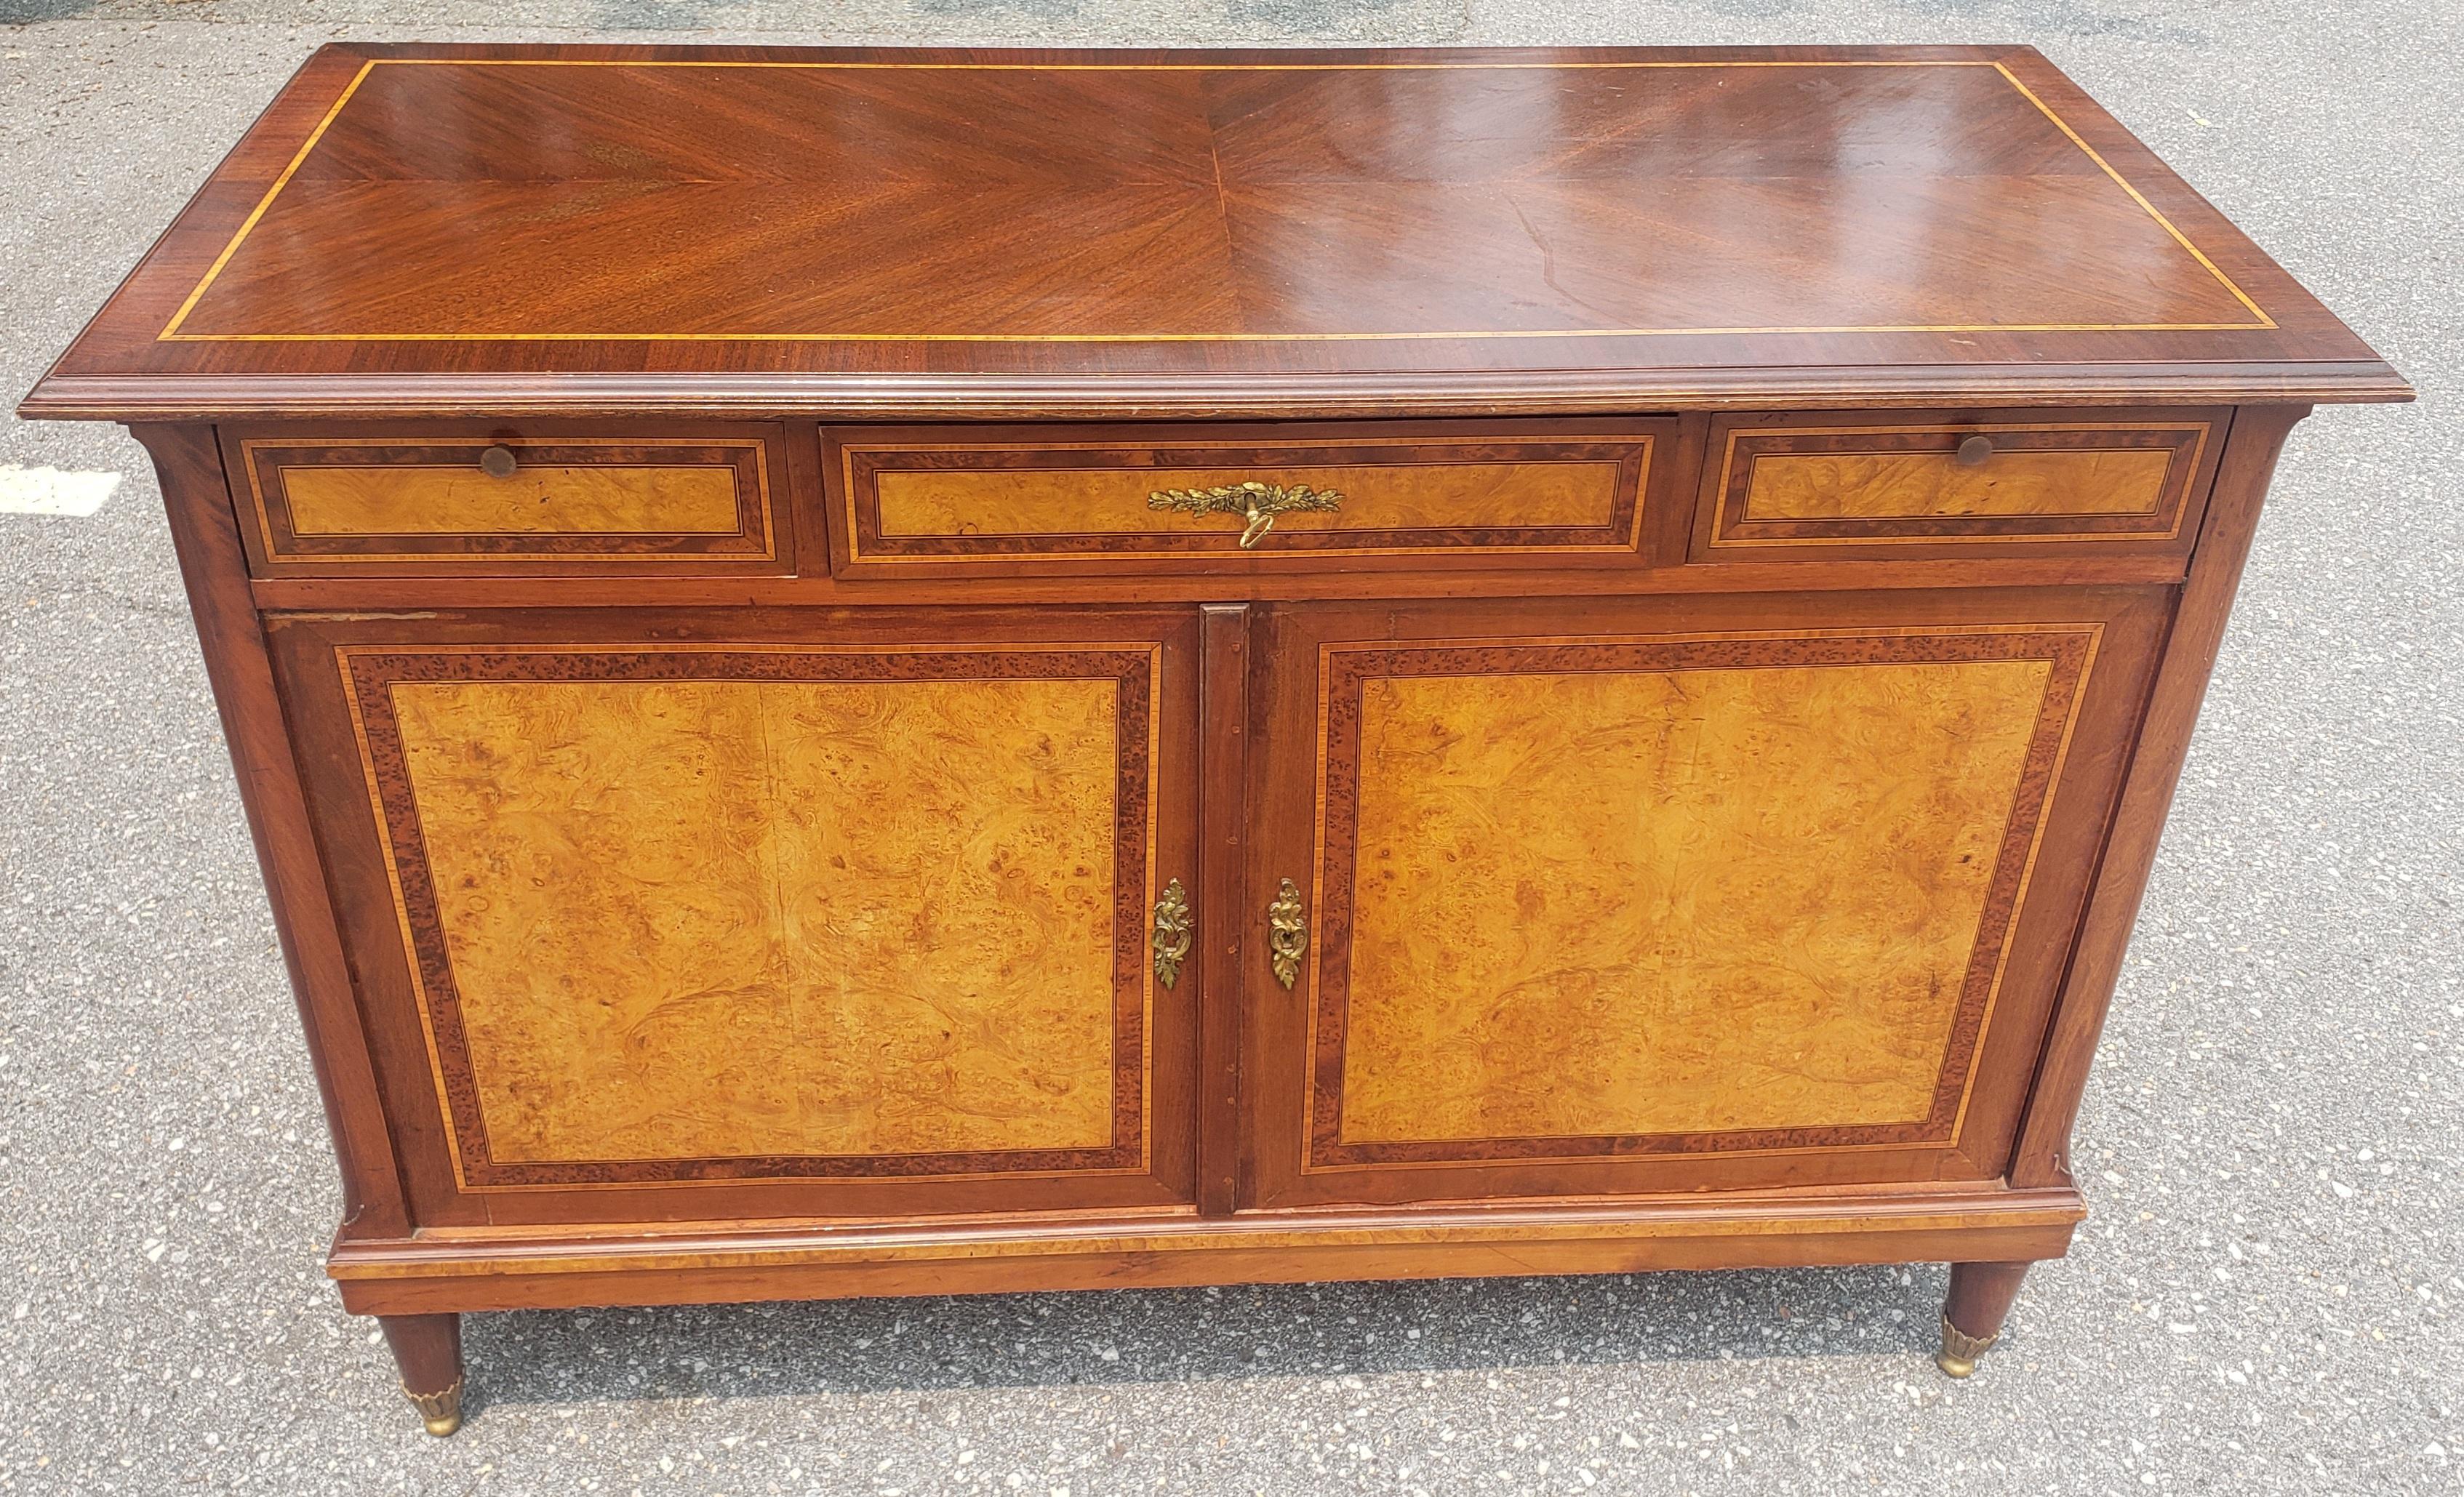 A very fine French Maison Soubrier Louis XV style Mixed woods and Burl  with Satinwood Marquetry Buffet in great vintage condition, Circa 1920s. Proportionate size, convenient for medium to smaller spaces. Surrounded with Fine inlays and marquetry